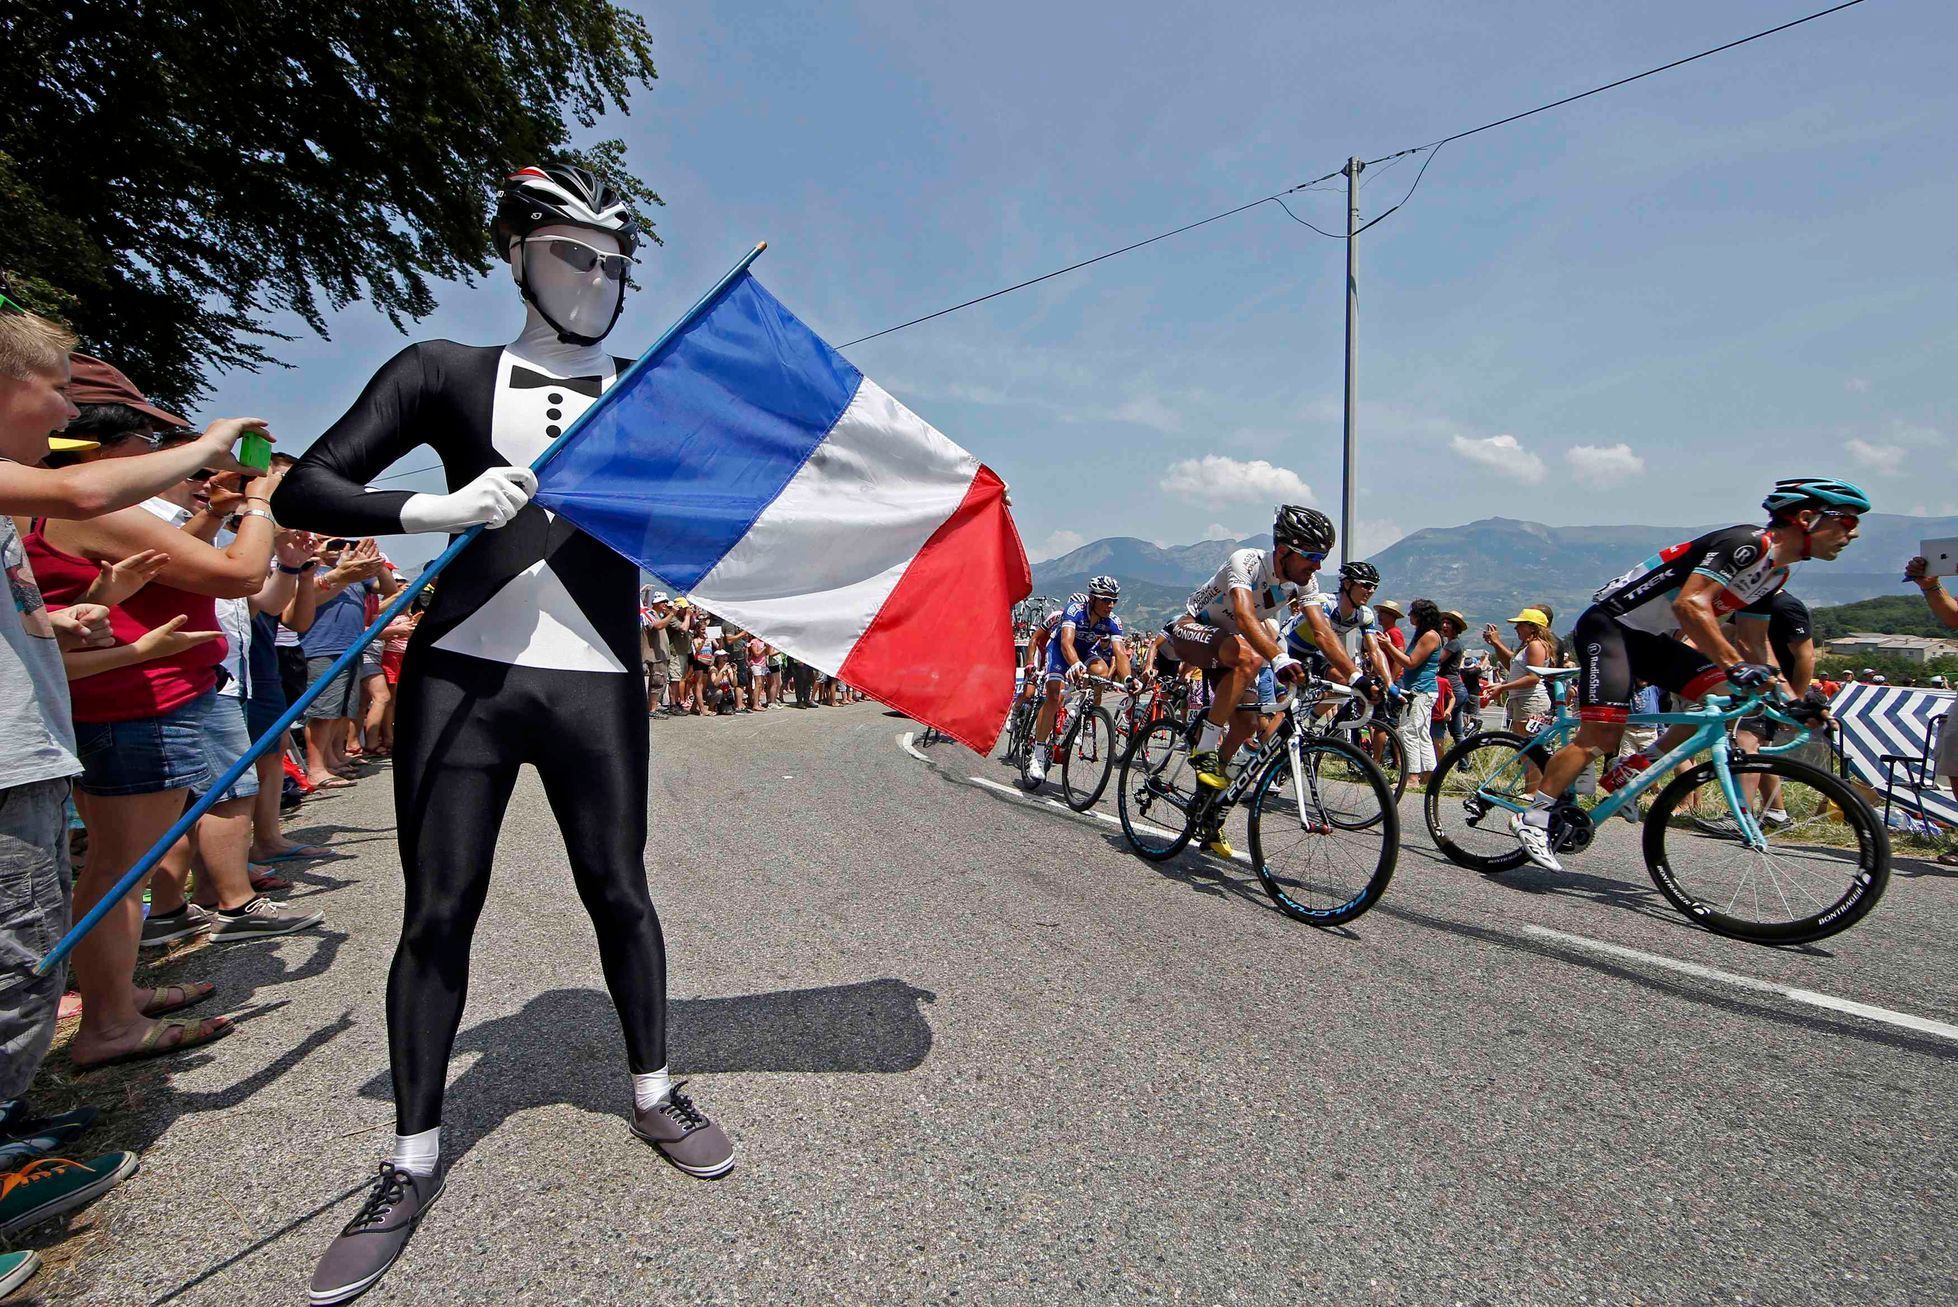 The pack of riders cycles past a French flag on Bastille day